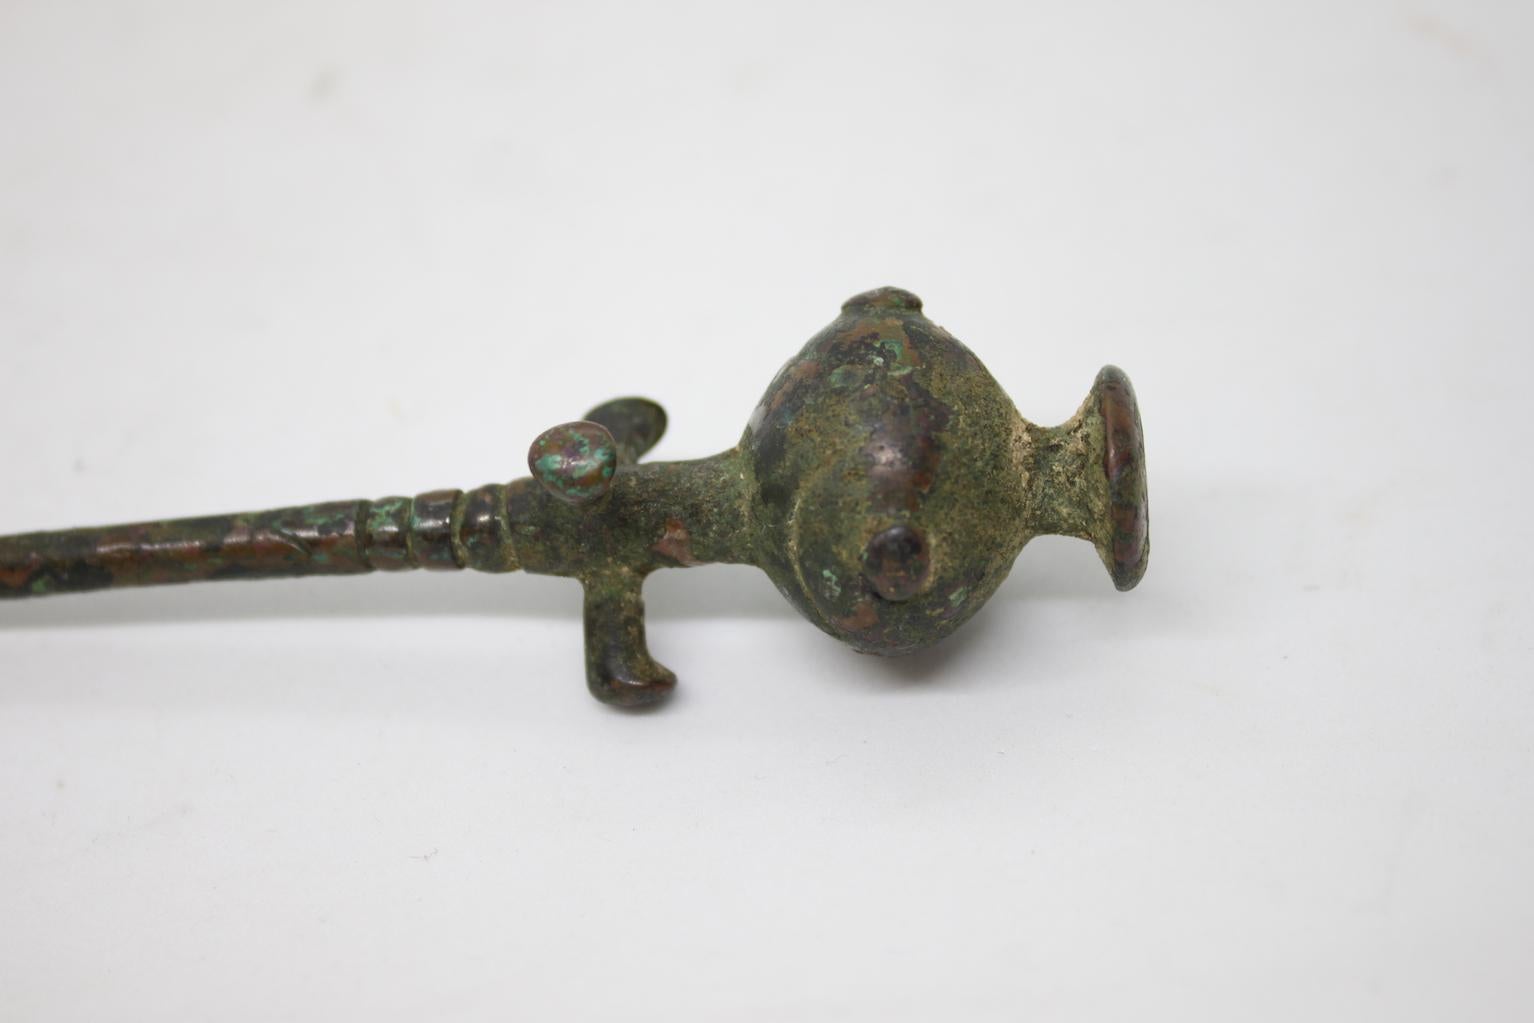 Armenian hair pin from 13th century BC, certified.
Dimensions: Height 17cm, diameter 2.5 cm.